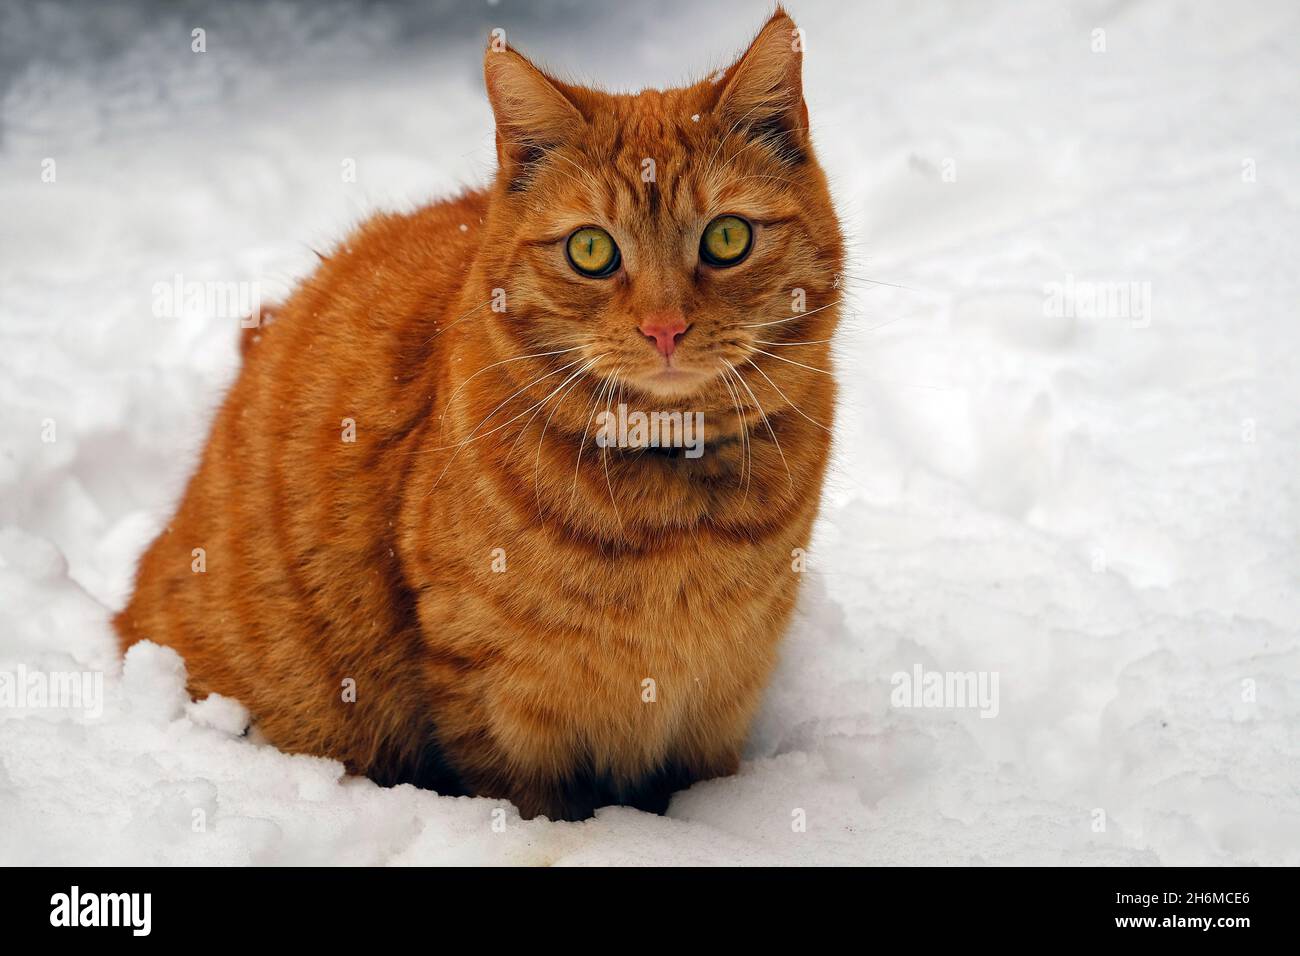 Ginger cat outdoors in snow in Co. Meath Ireland Stock Photo